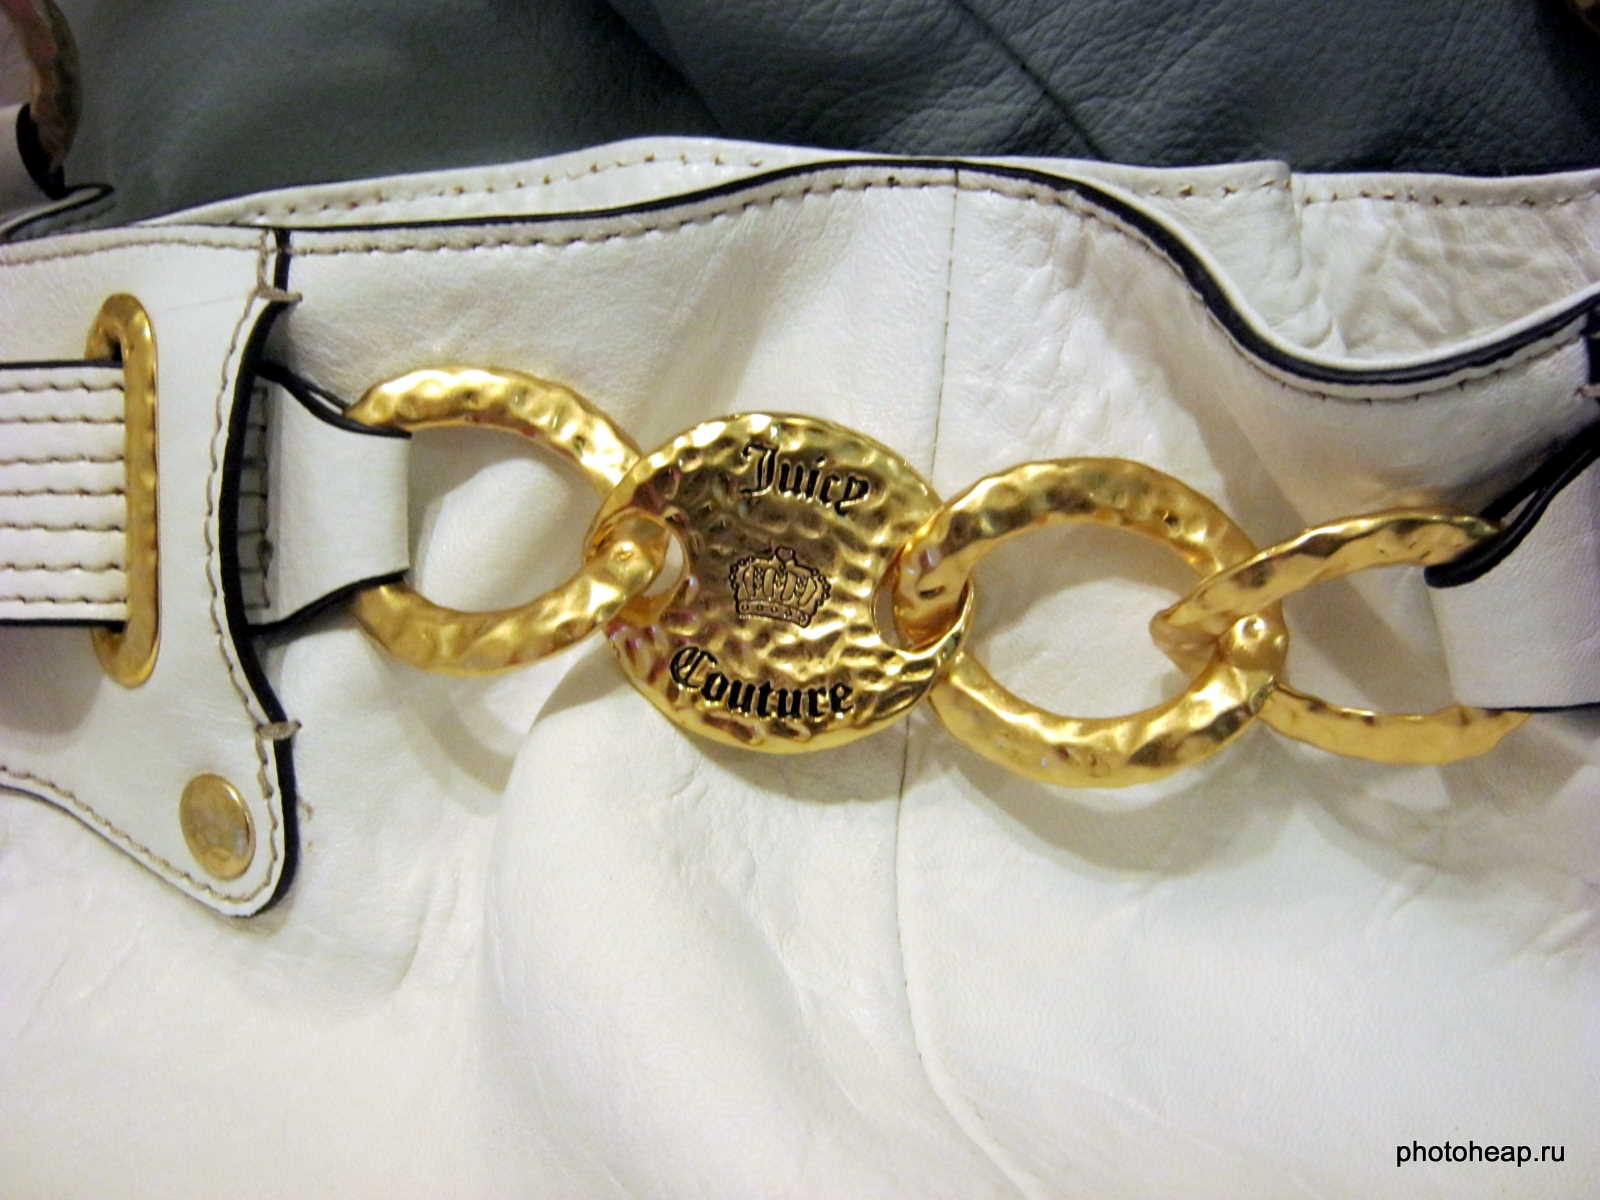 Juicy Couture bag chain